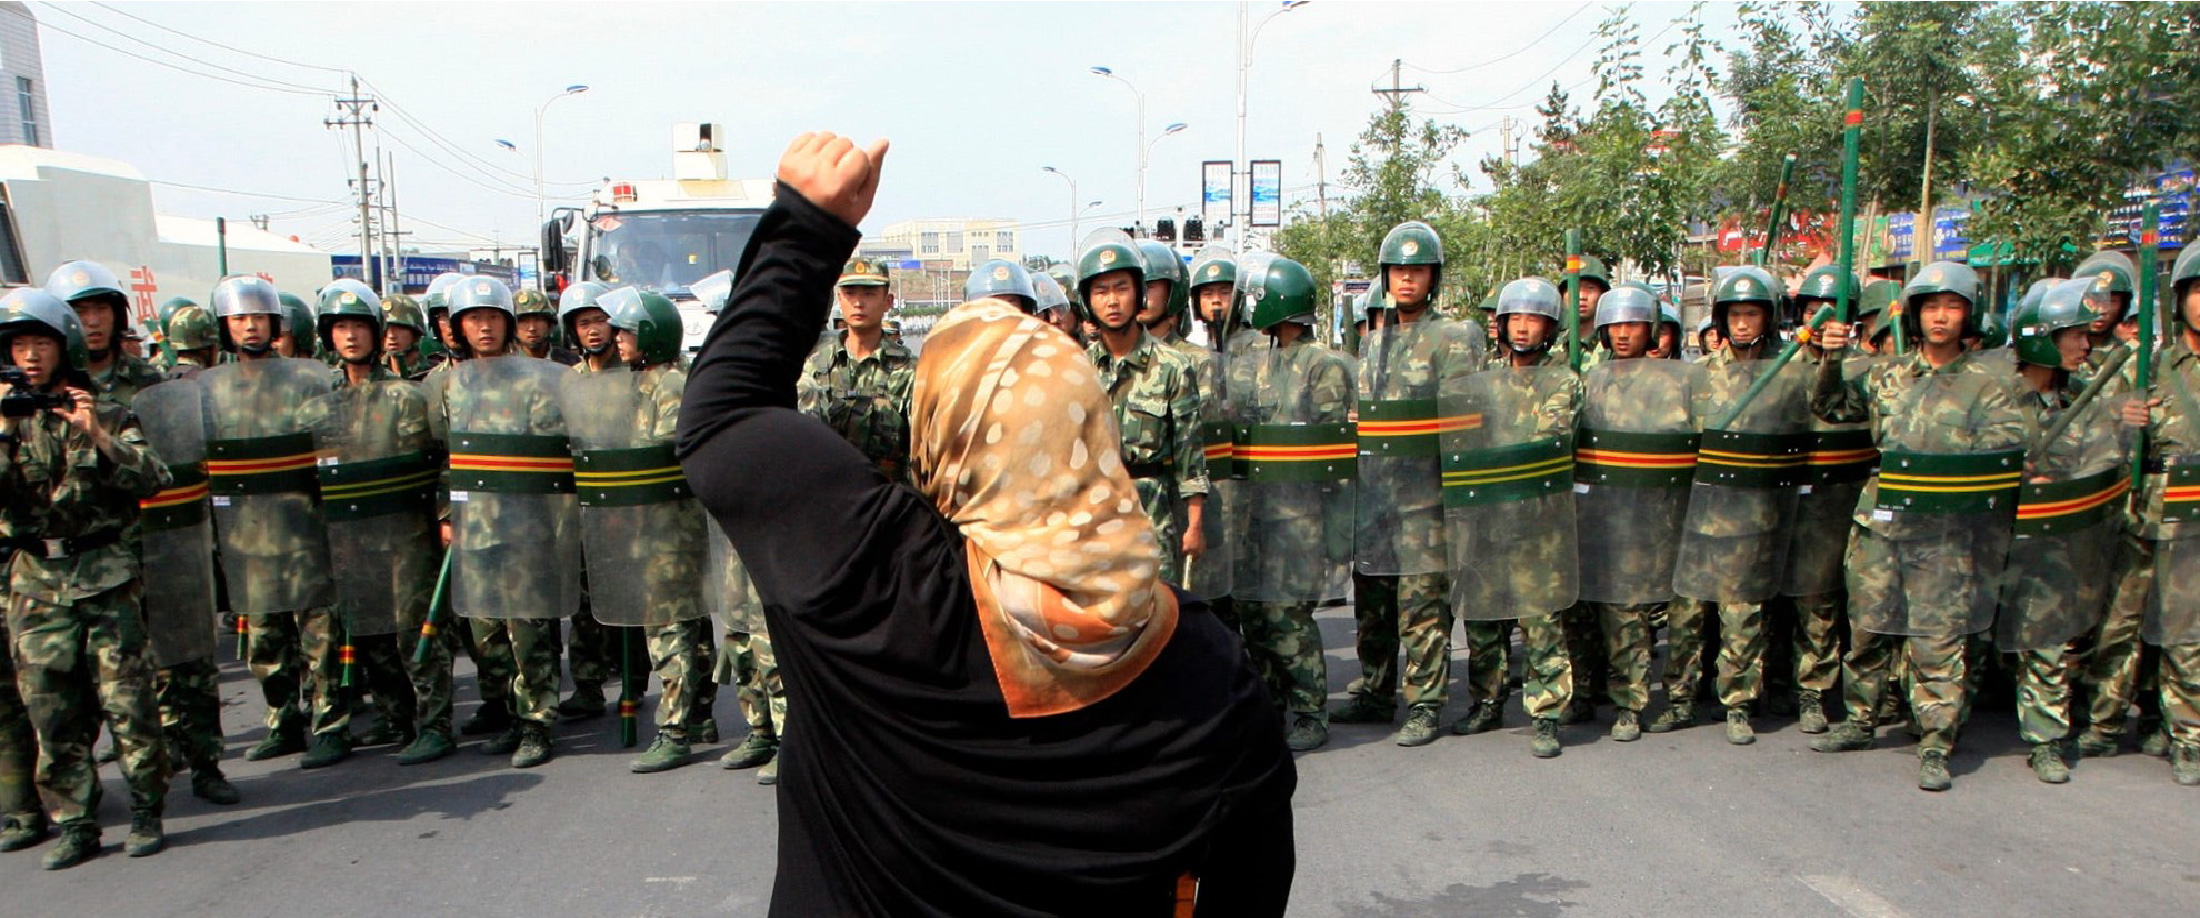 Where Human Rights Are Forgotten: East Turkistan